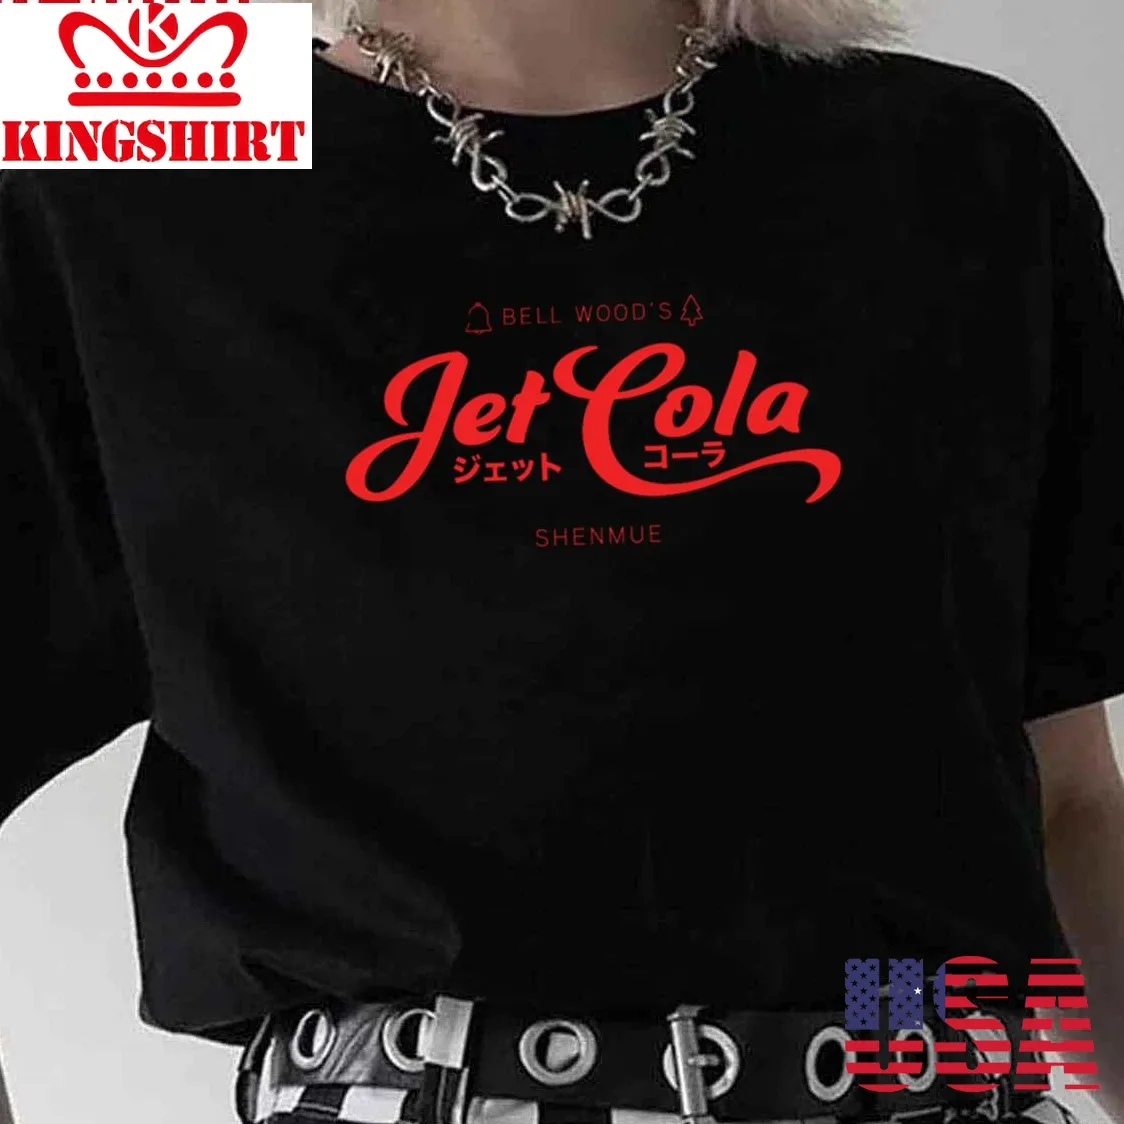 Bell Wood's Jet Cola Shenmue Unisex T Shirt